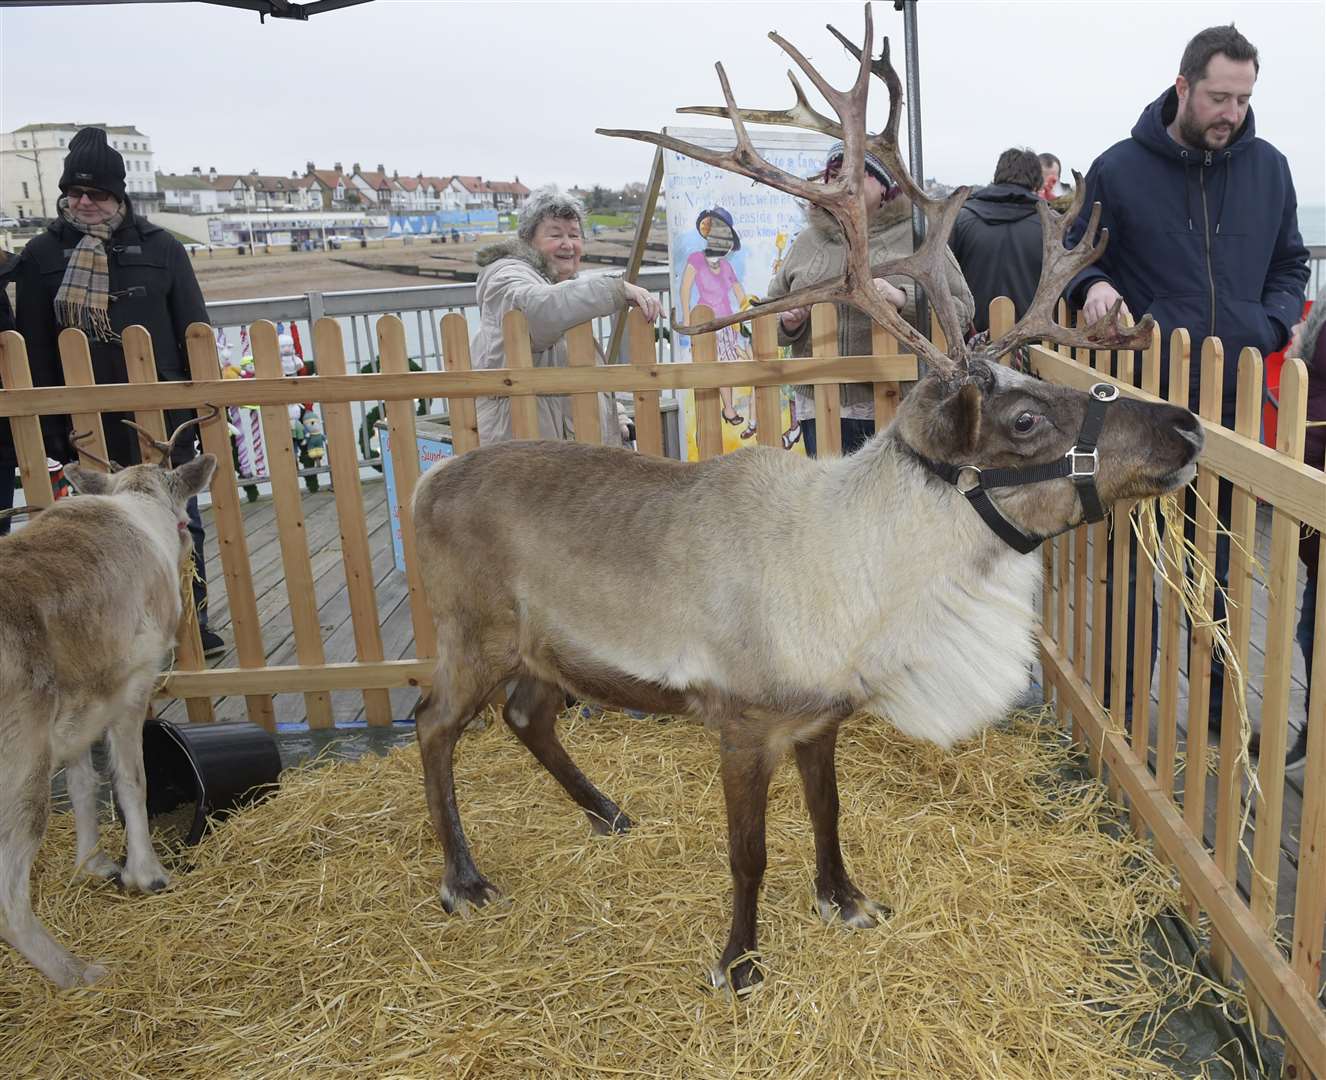 Reindeer at a previous event on Herne Bay pier